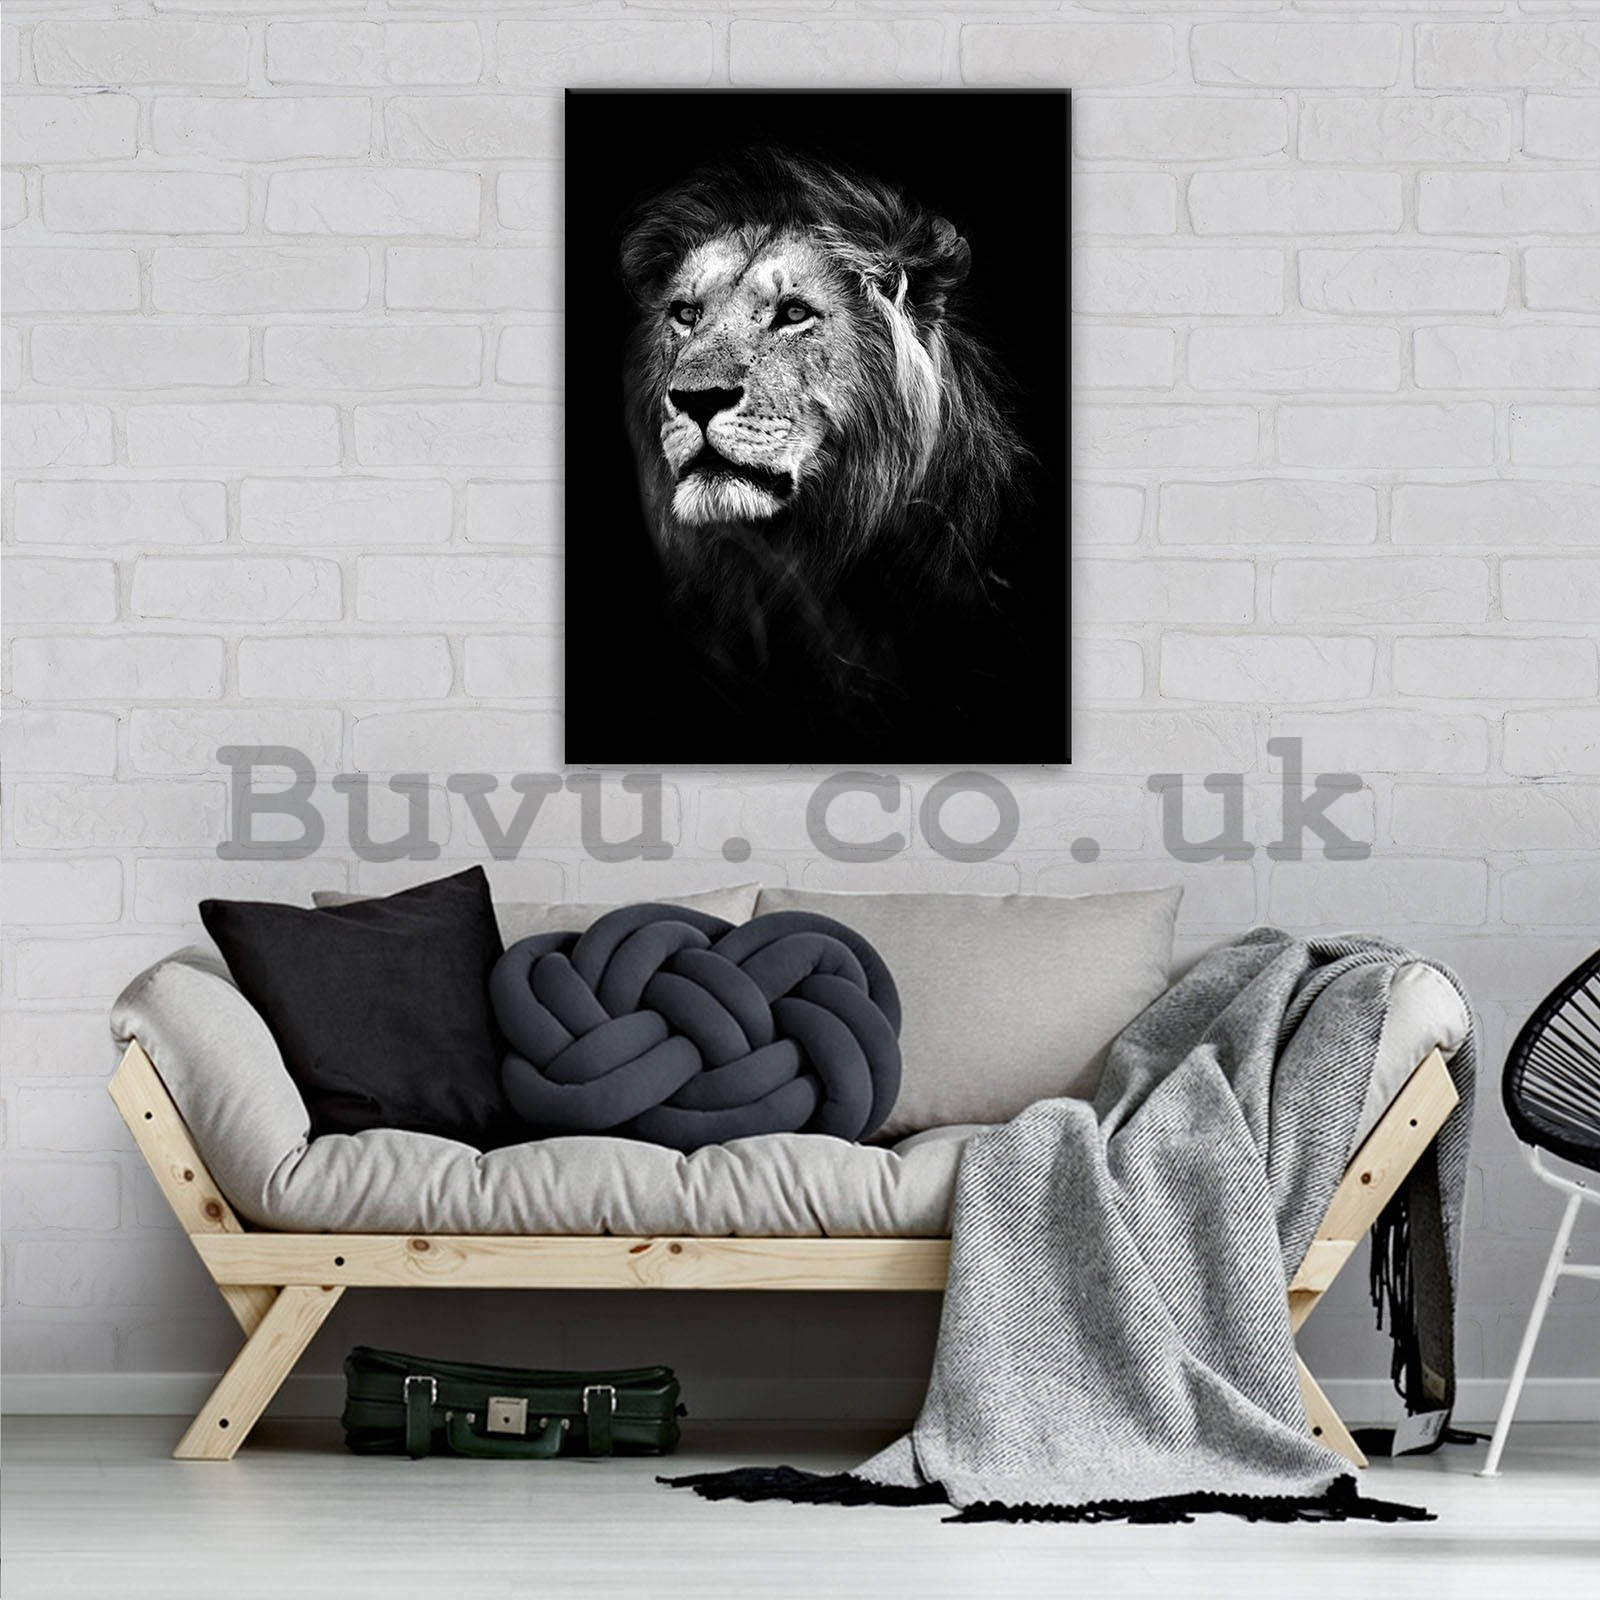 Painting on canvas: The Lion (5) - 60x80 cm